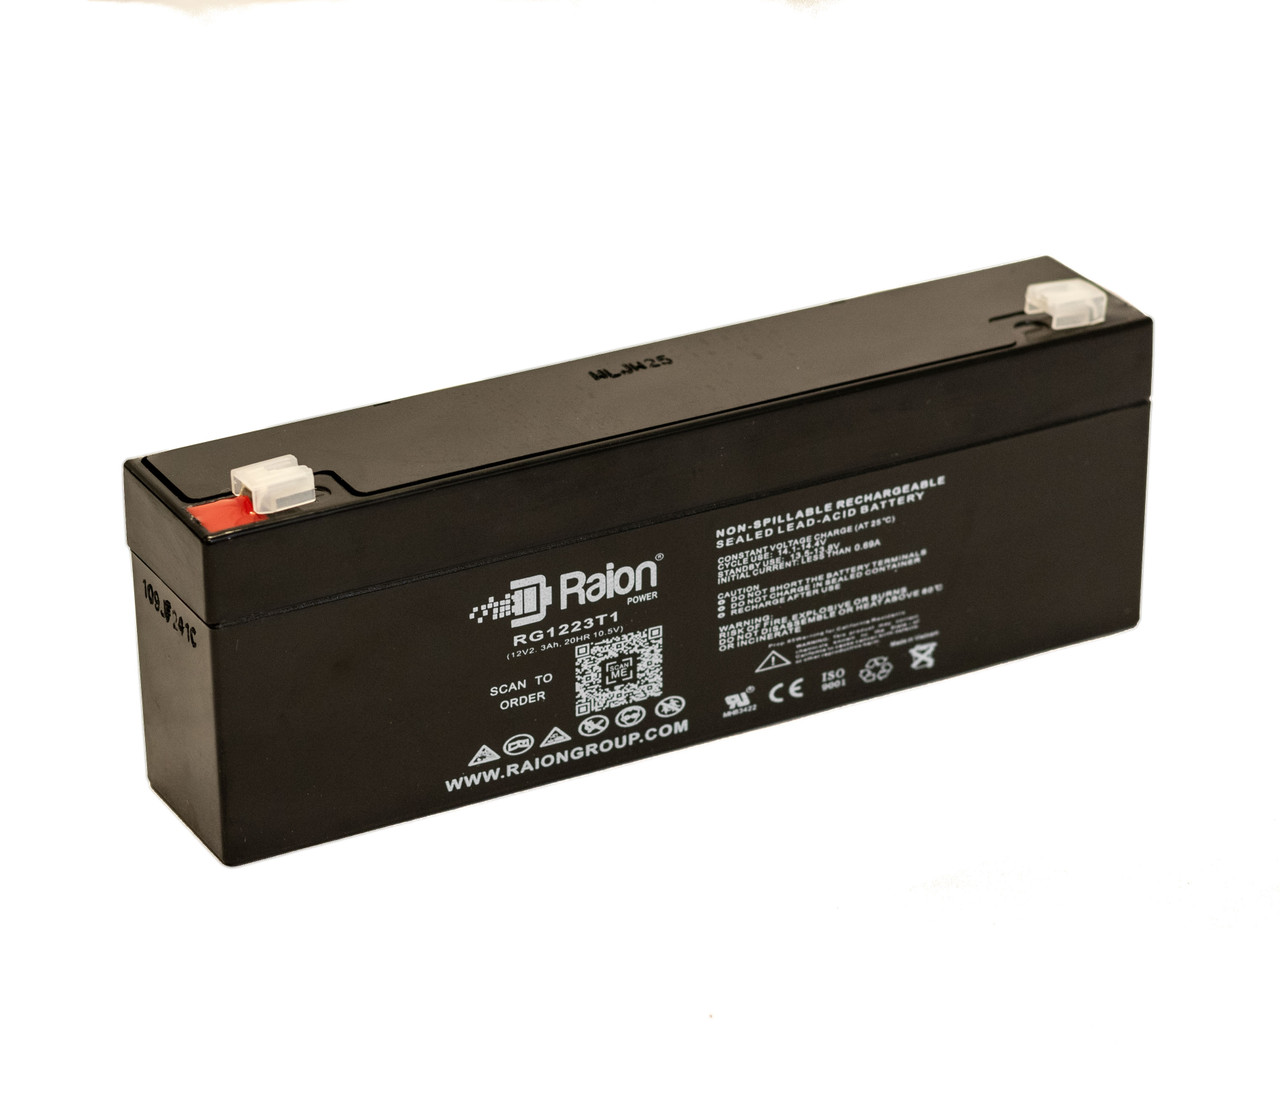 Raion Power RG1223T1 Replacement Battery for B Braun 620-100